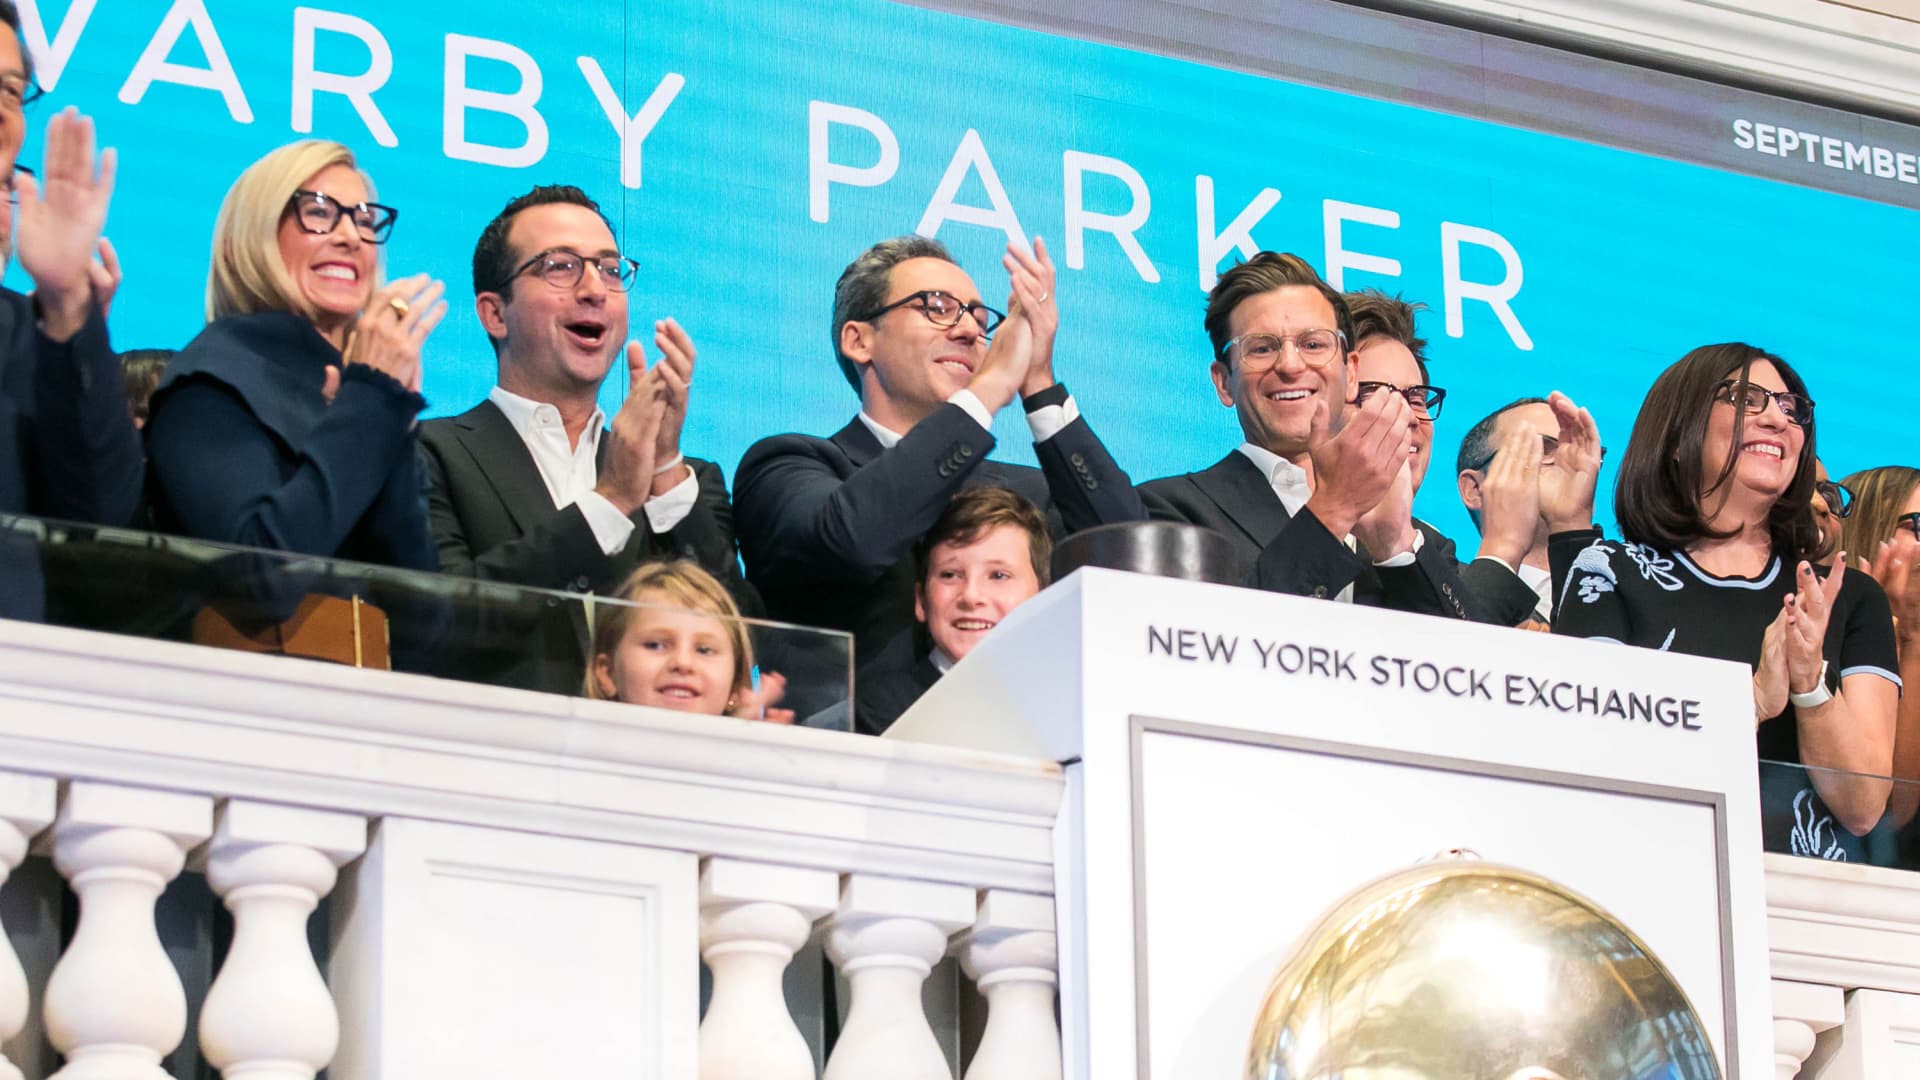 Goldman downgrades Warby Parker, cites ‘fading confidence’ in revenue outlook